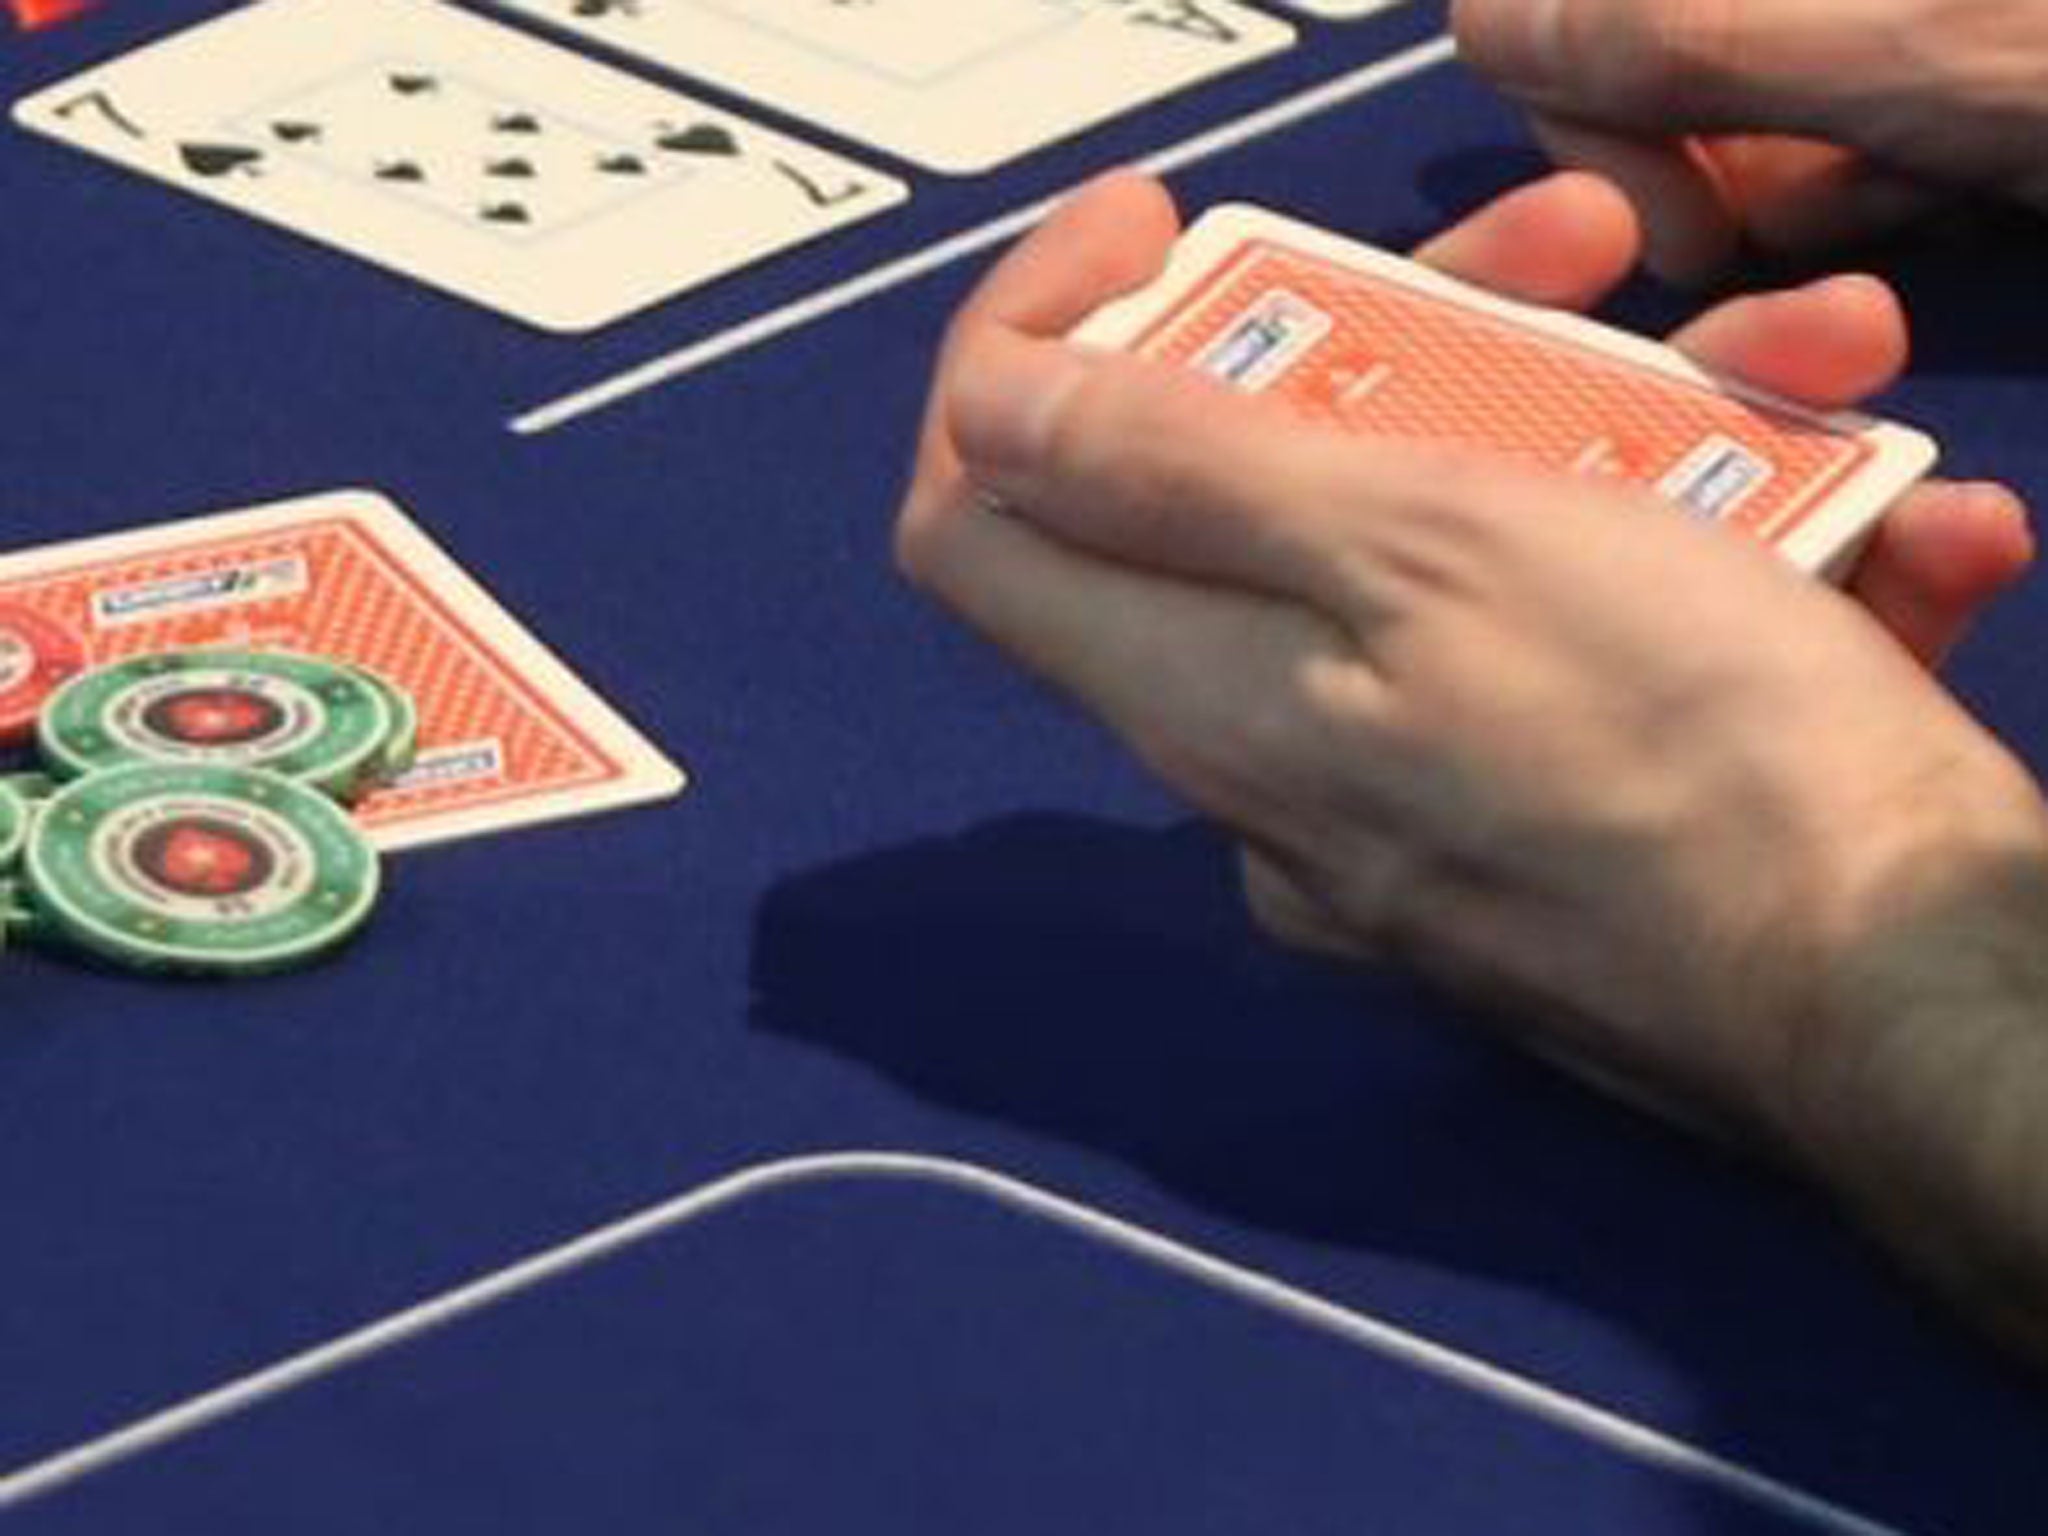 The man is said to have changed his name after he lost a poker bet